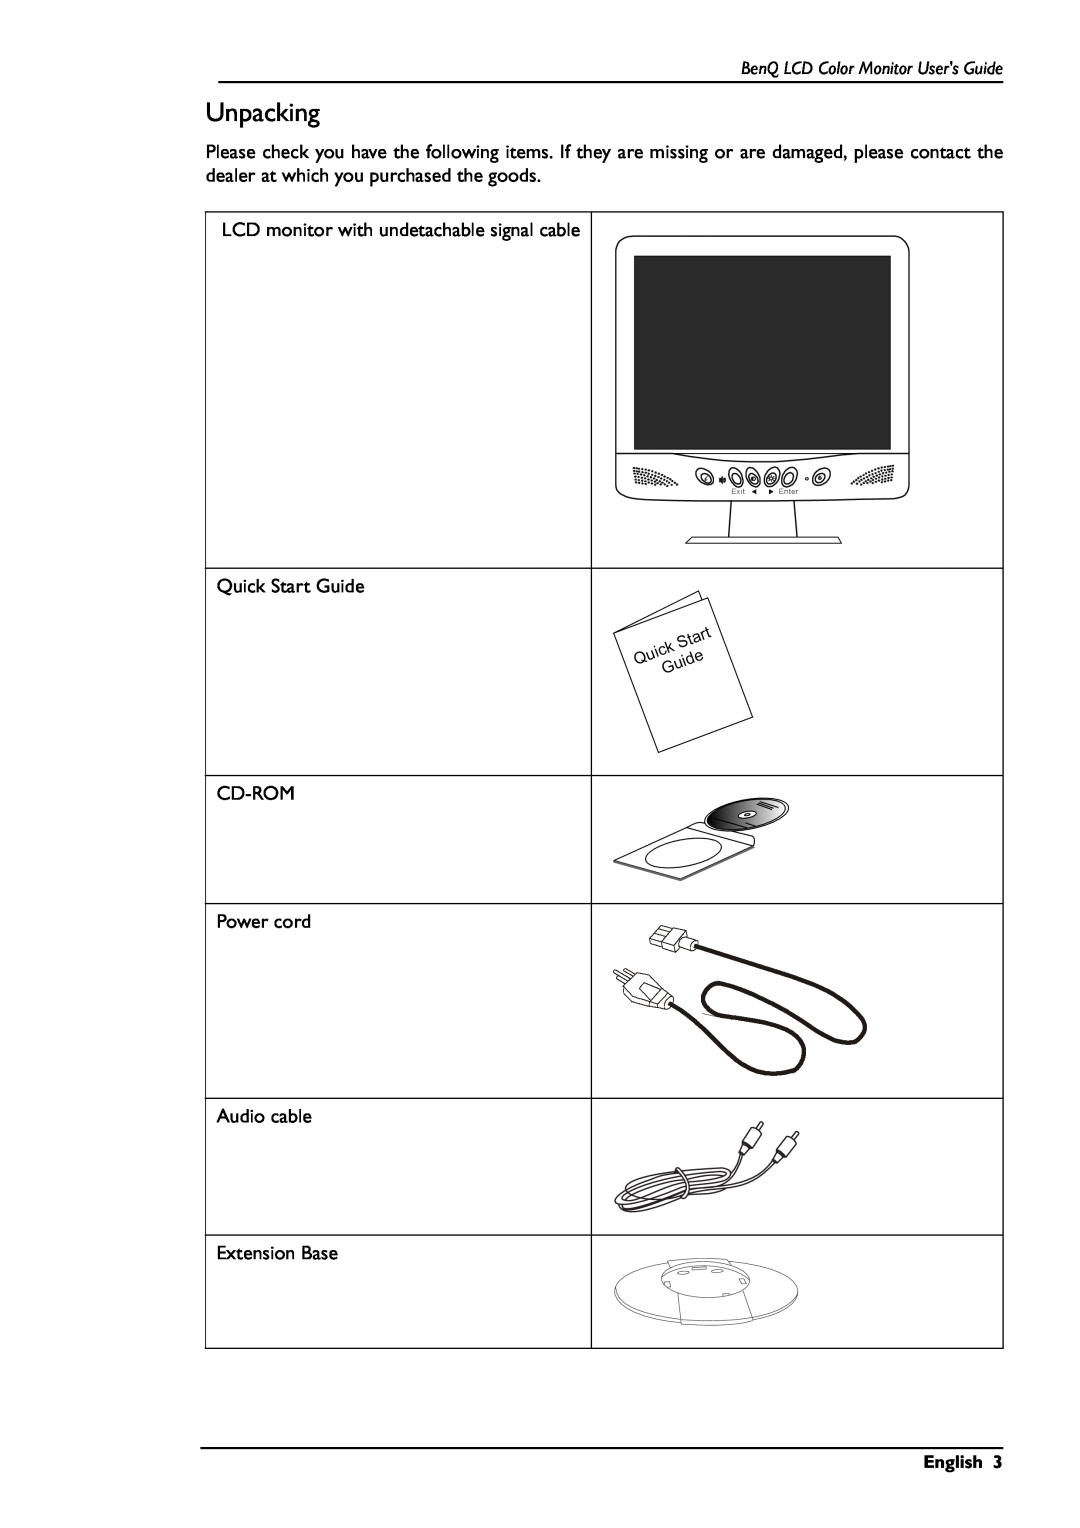 BenQ FP567 user manual Unpacking, BenQ LCD Color Monitor Users Guide, English, Exit, Enter 